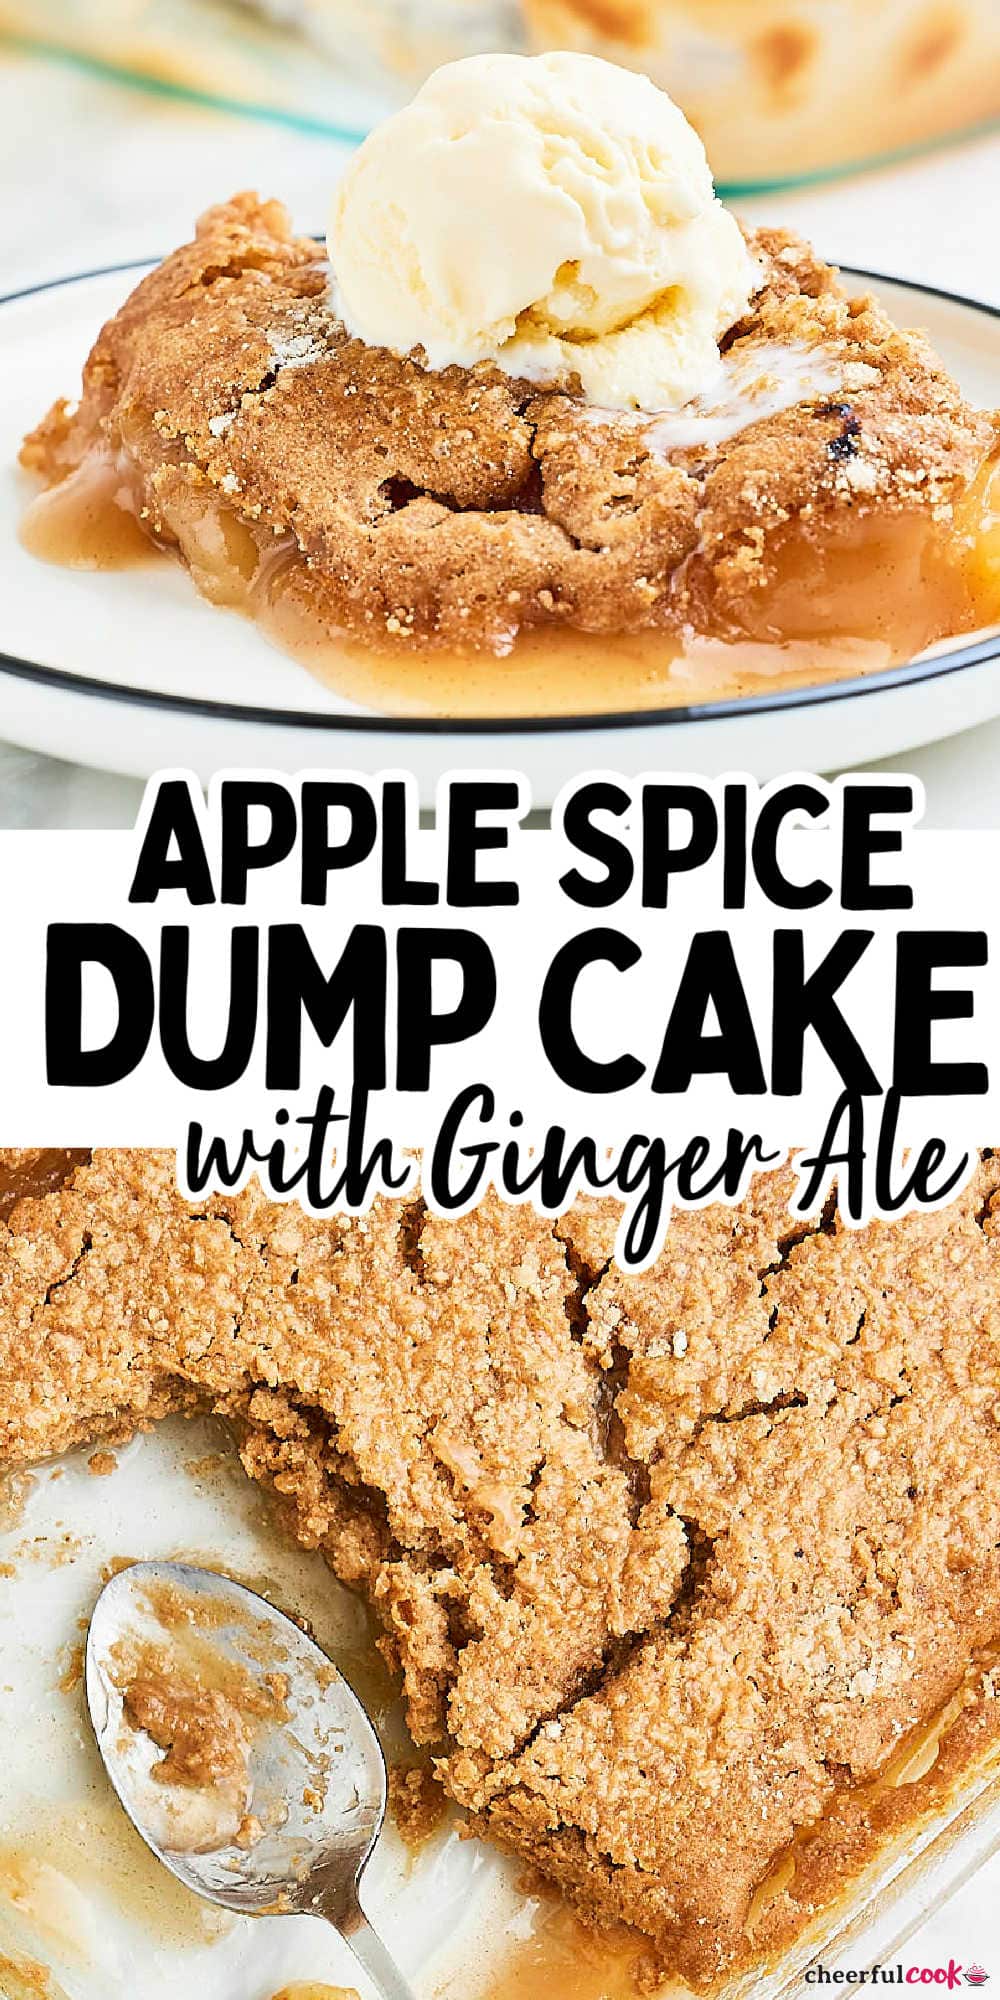 Our Apple Spice Dump Cake is super easy to make with just 3 ingredients! Perfect for a quick dessert. #cheerfulcook #AppleSpiceDumpCake #EasyDesserts #FallRecipes #dumpcake via @cheerfulcook